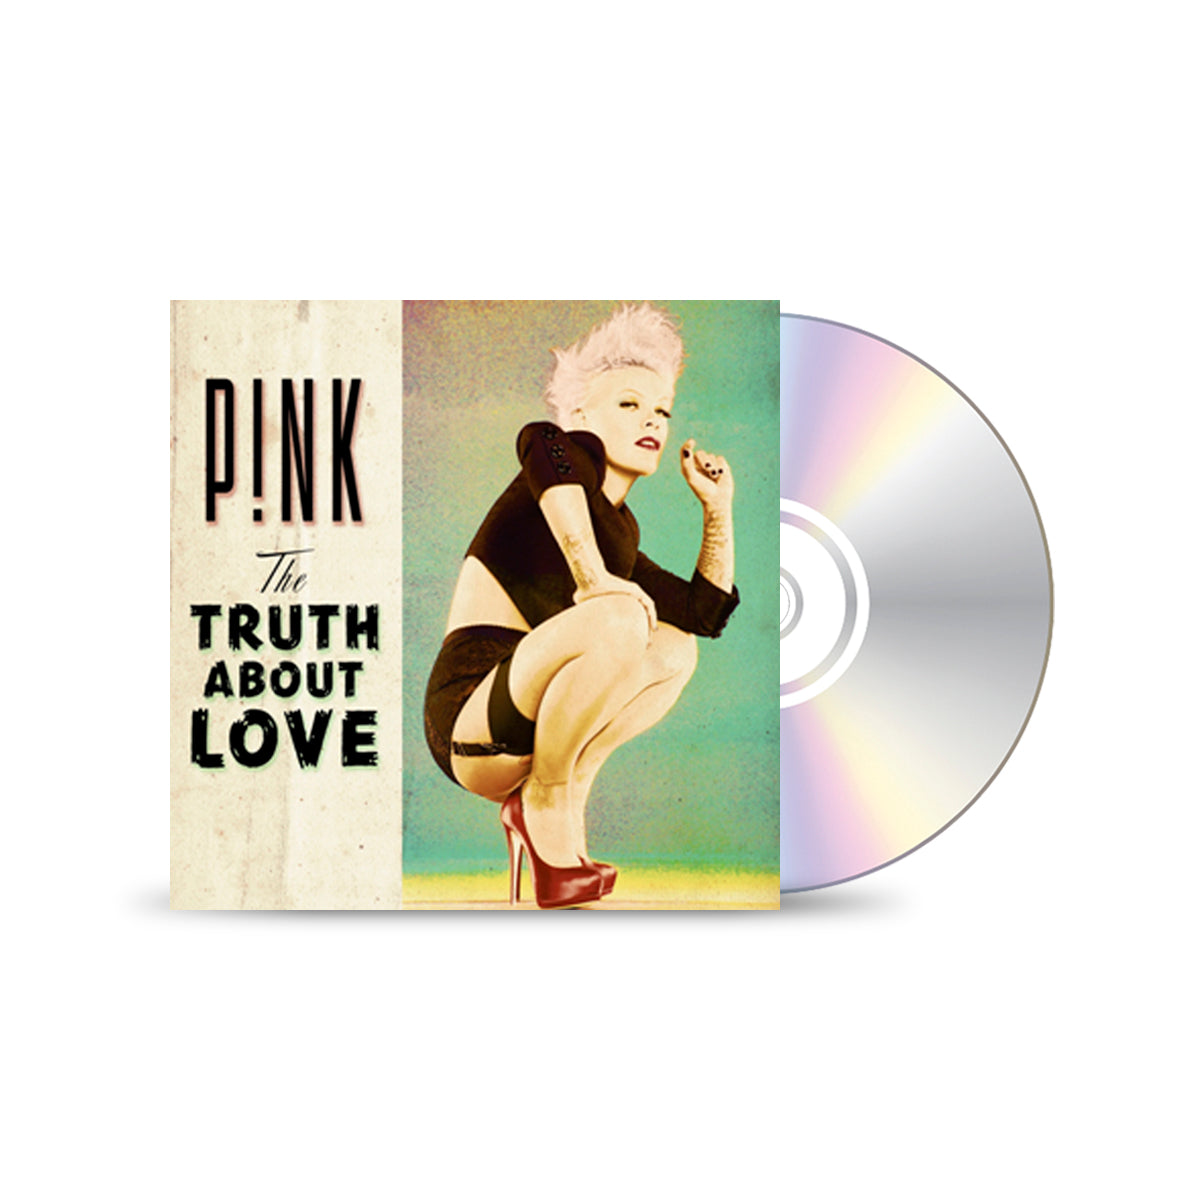 P!nk - The Truth About Love CD